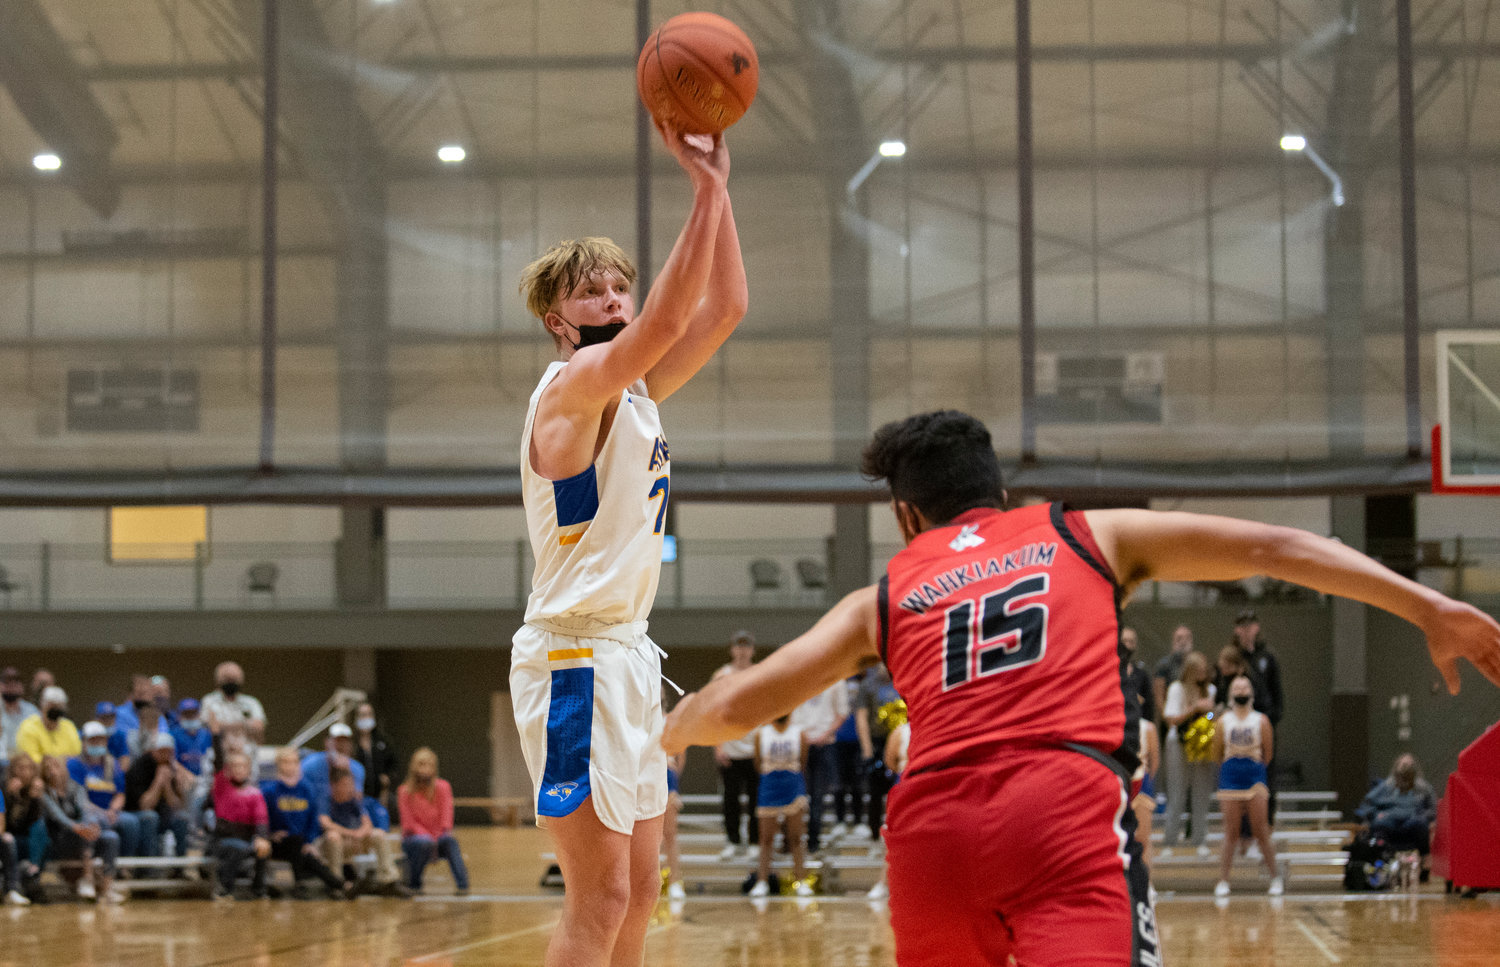 Adna sophomore Seth Meister shoots a jumper in the fourth quarter against Wahkiakum Thursday in the third-fourth place game at districts.